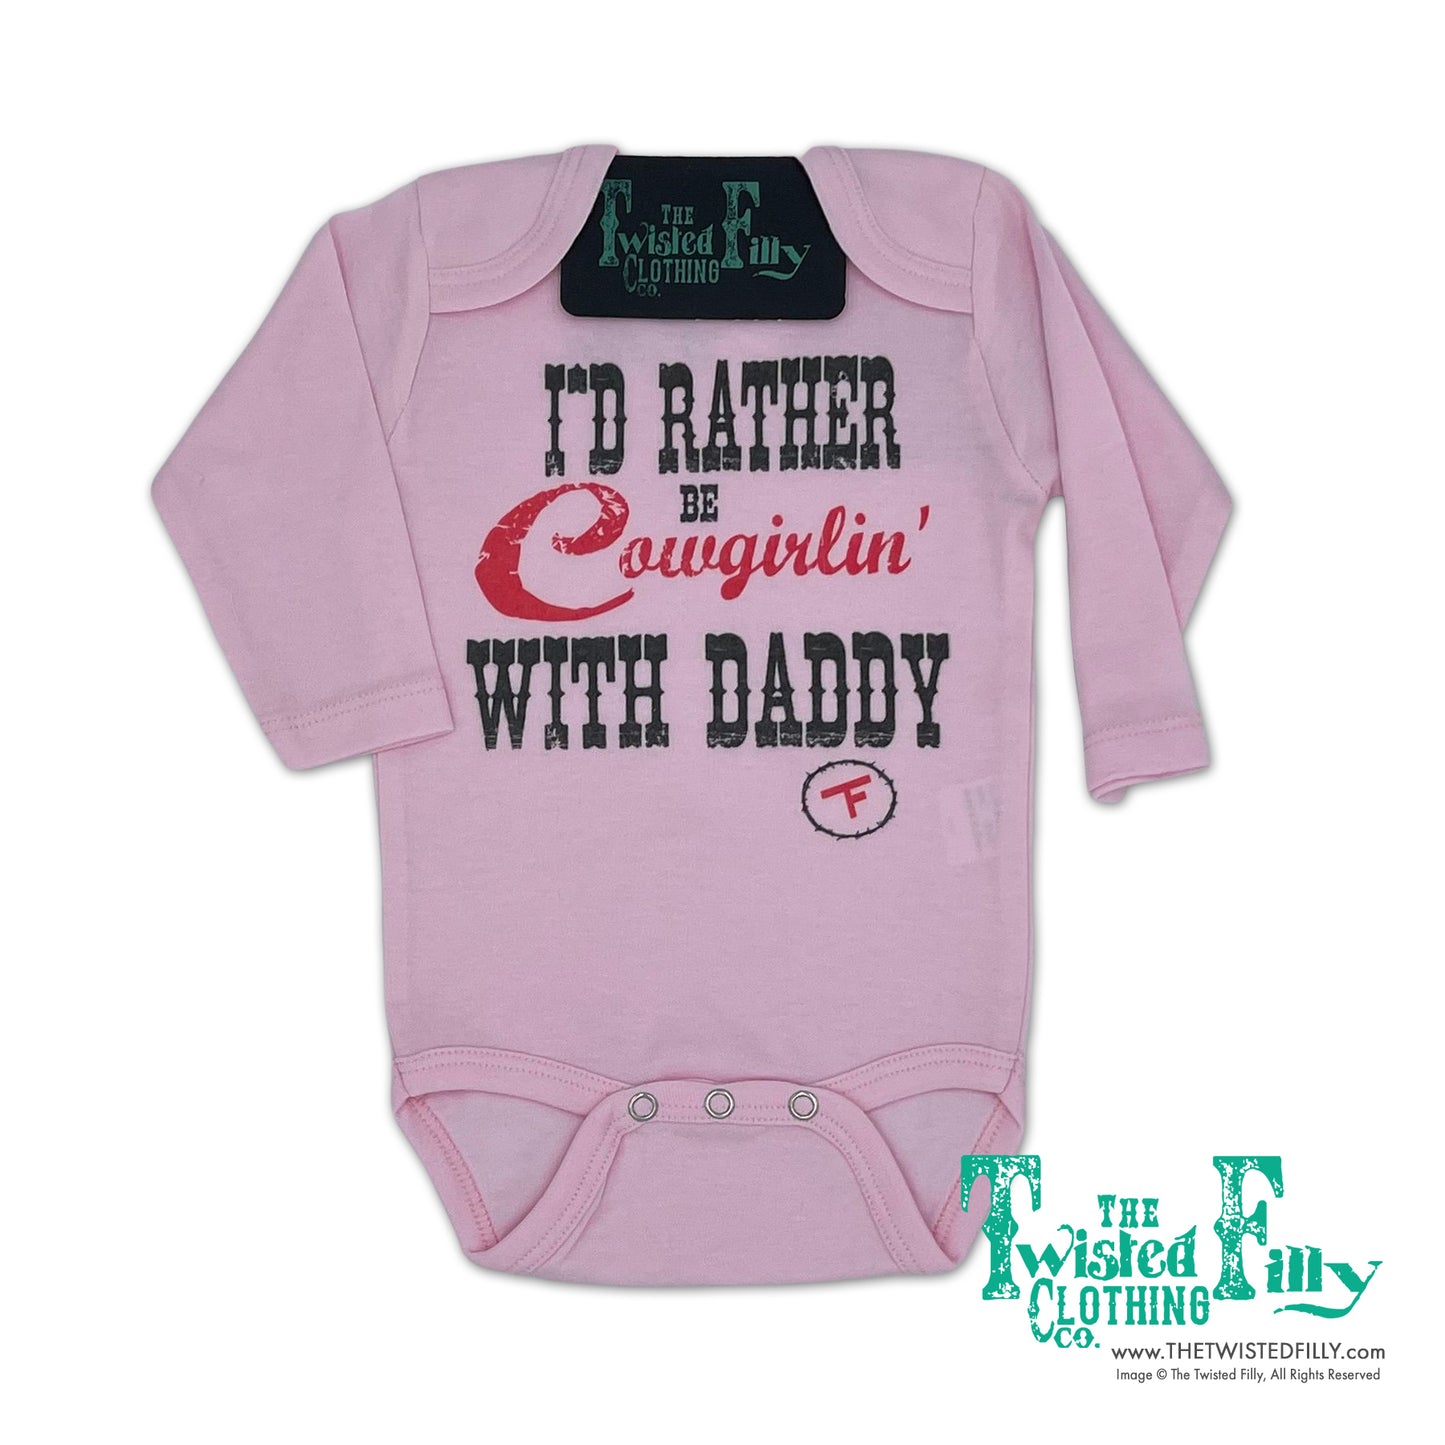 I'd Rather Be Cowgirlin' w/ Daddy - L/S Infant One Piece - Pink